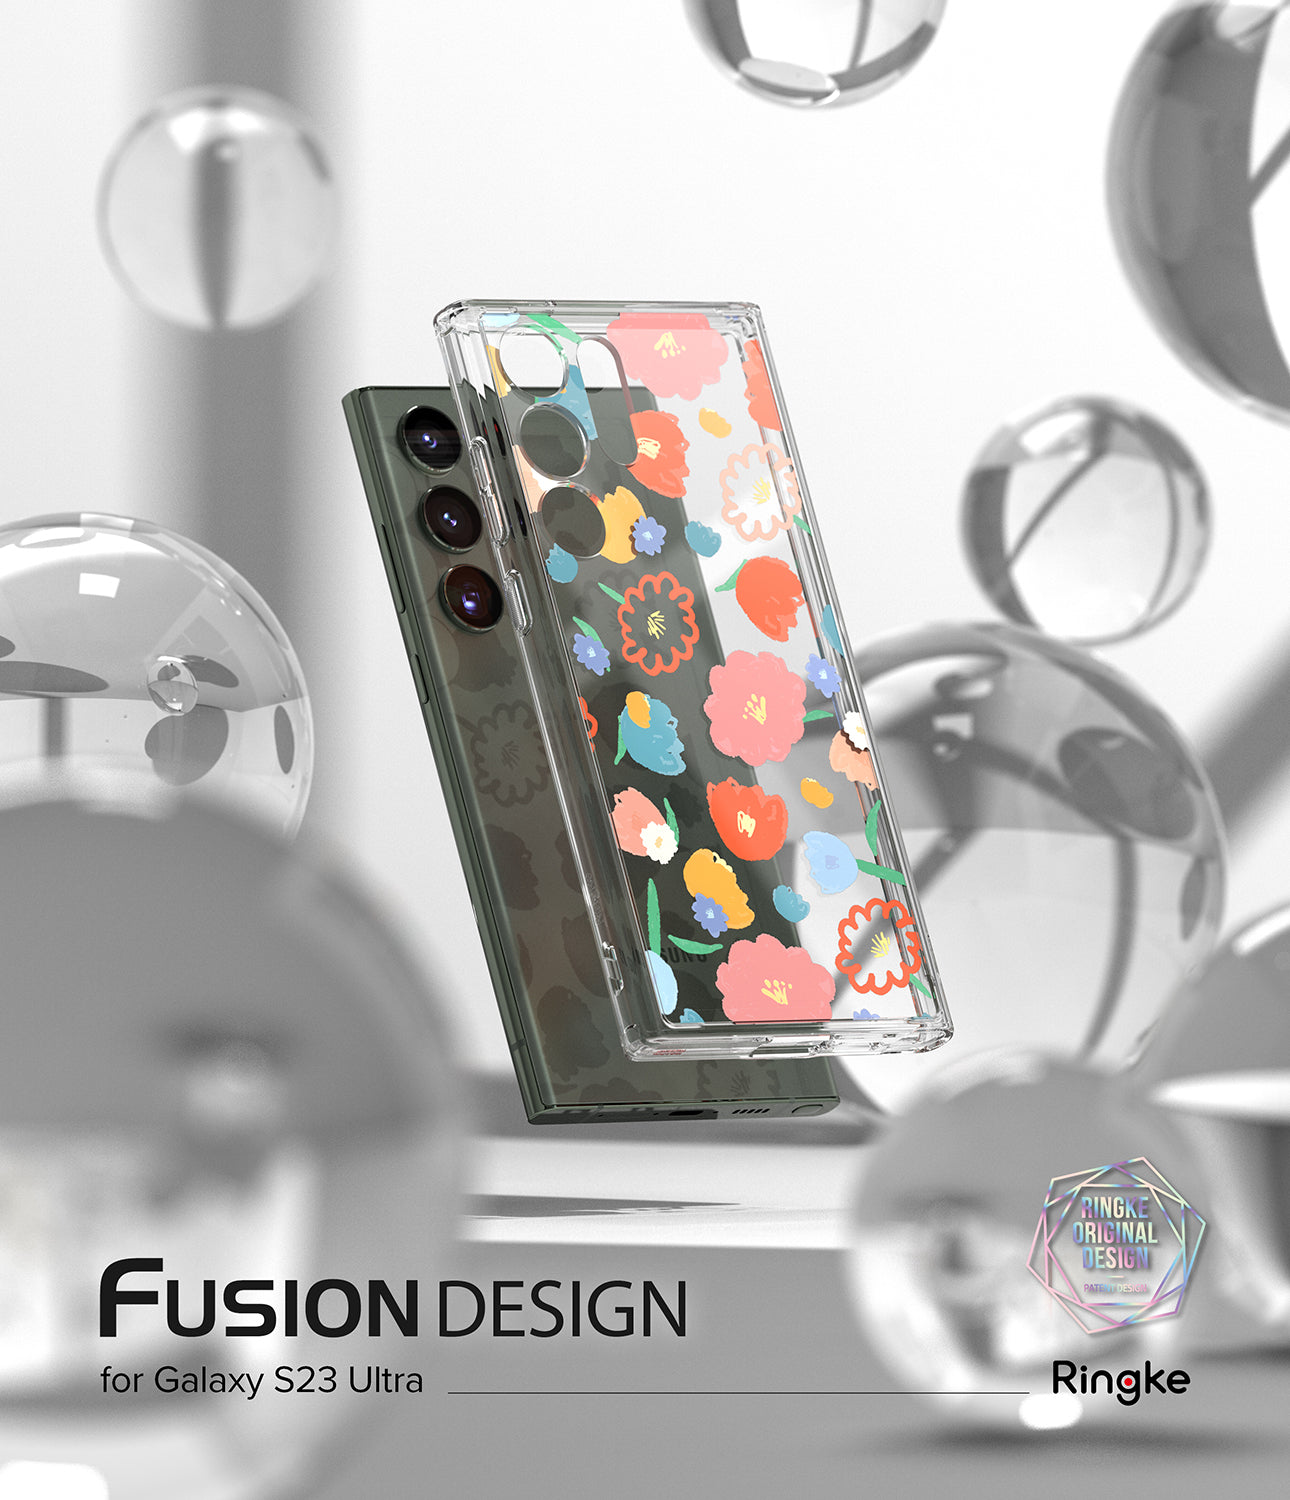 Ringke Fusion Design Compatible with Samsung Galaxy S23 Ultra 5G Case, Clear Hard Back with Flowers Design Shockproof TPU Bumper Phone Cover for